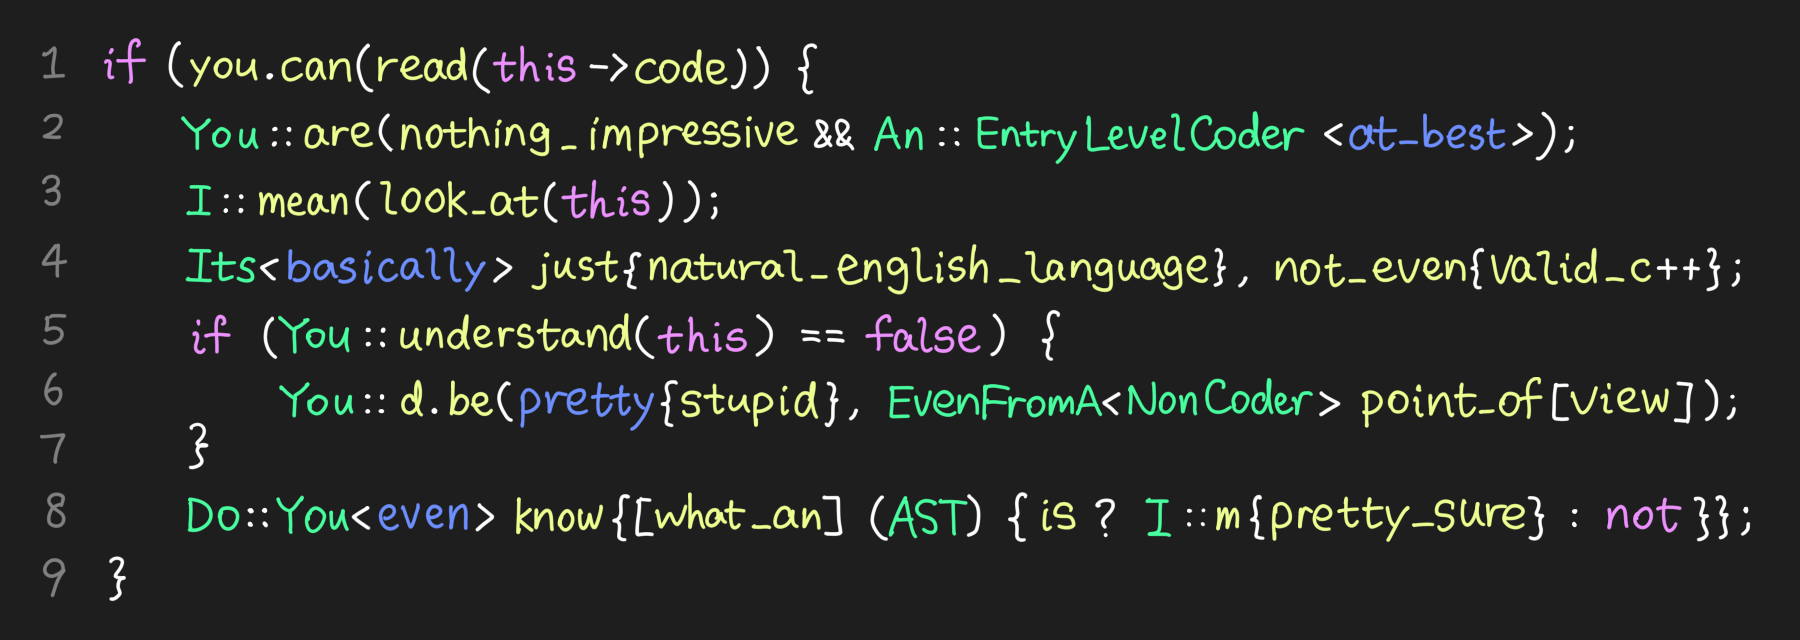 Dark themed code editor with syntax highlighting. The code goes:

if (you.can(read(this->code)) {
You::are(nothing_impressive && An::EntryLevelCoder<at_best>);
I::mean(look_at(this));
Its<basically> just{natural_english_language}, not_even{valid_c++};
if (You::understand(this) == false)
You::d.be(pretty{stupid}, EvenFromA<NonCoder> point_of[view]);

Do::You<even> know{[what_an] (AST) {is ? I::m{pretty_sure} : not}};
}